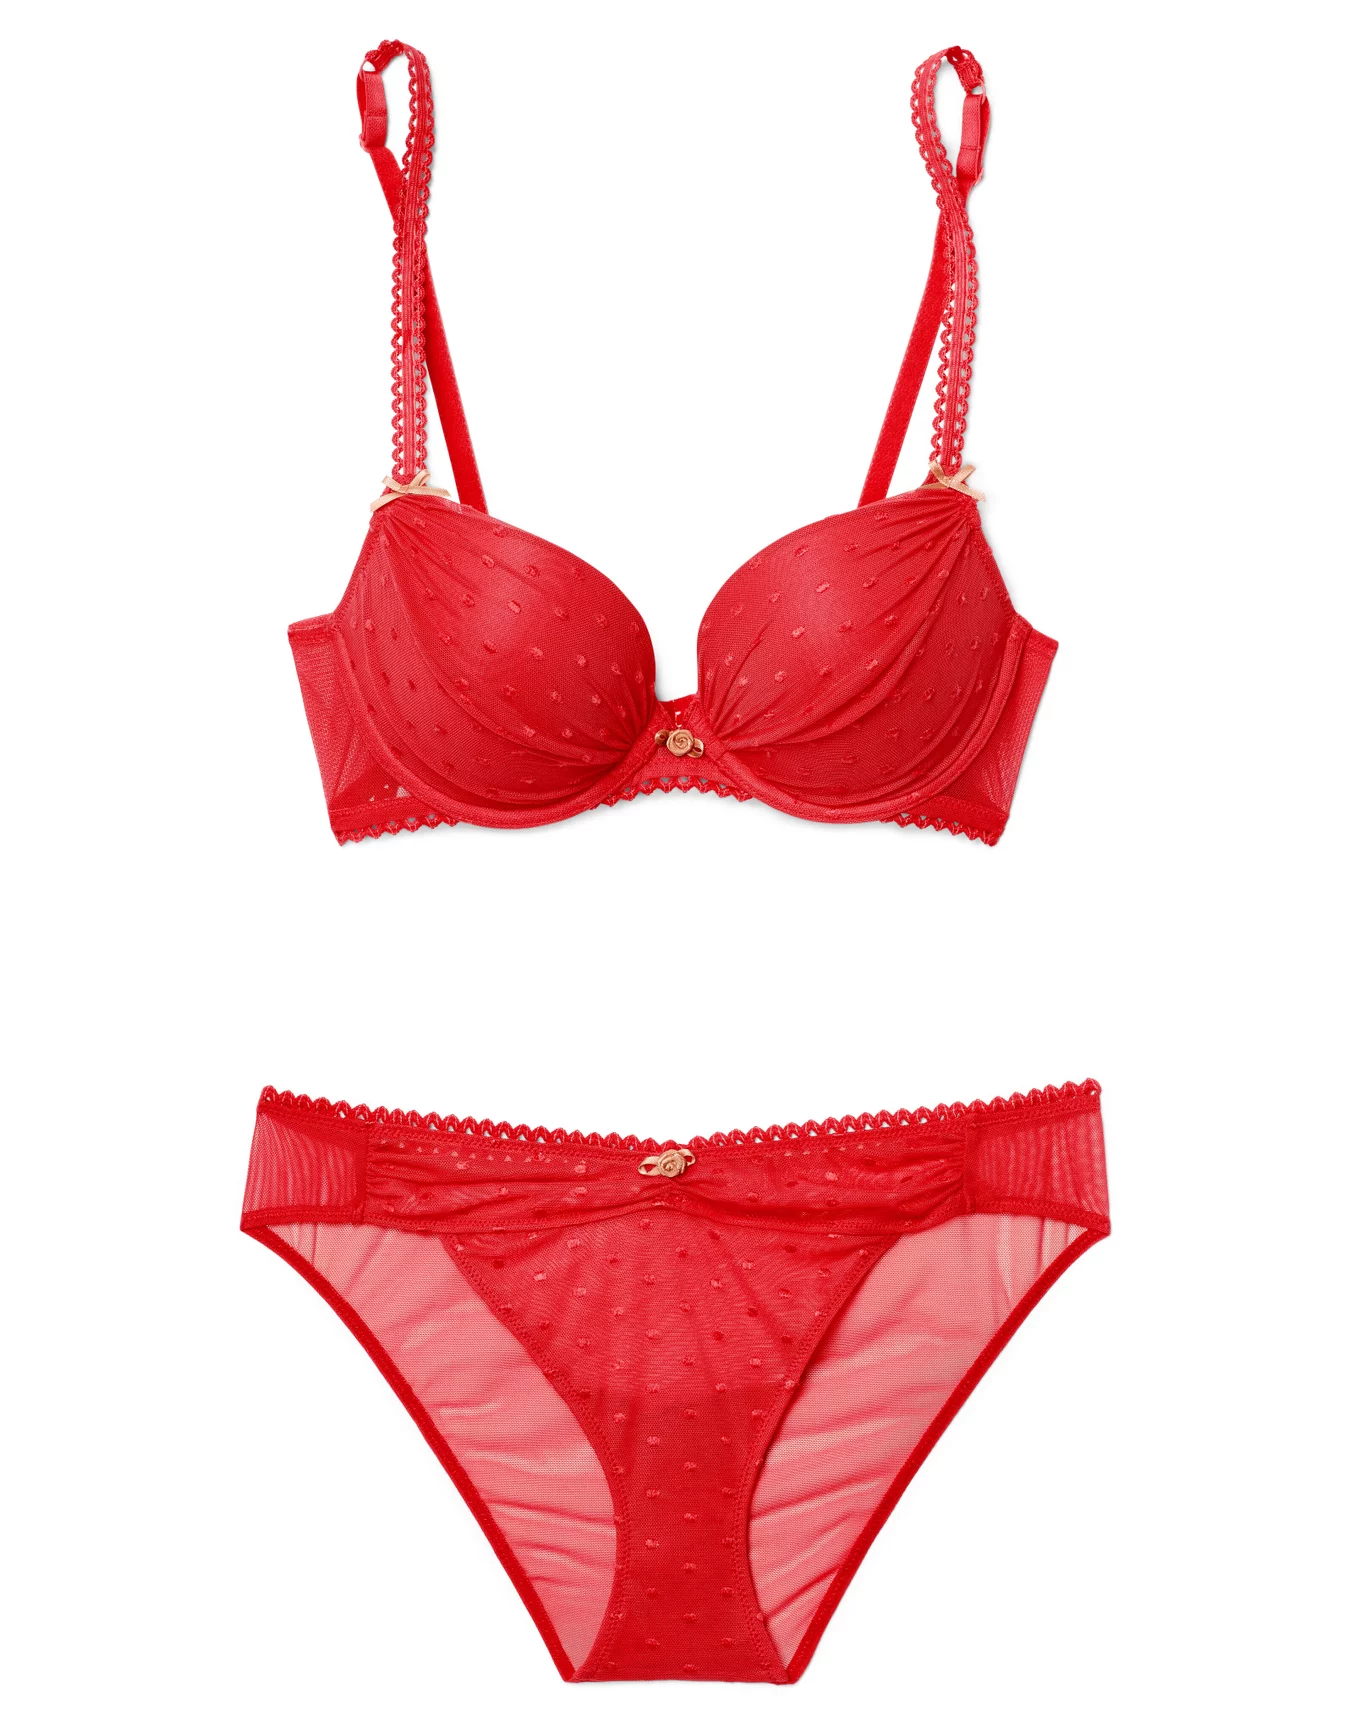 Women's Sexy Red Lips and Kiss Pattern Push-up Underwire Bra Set 